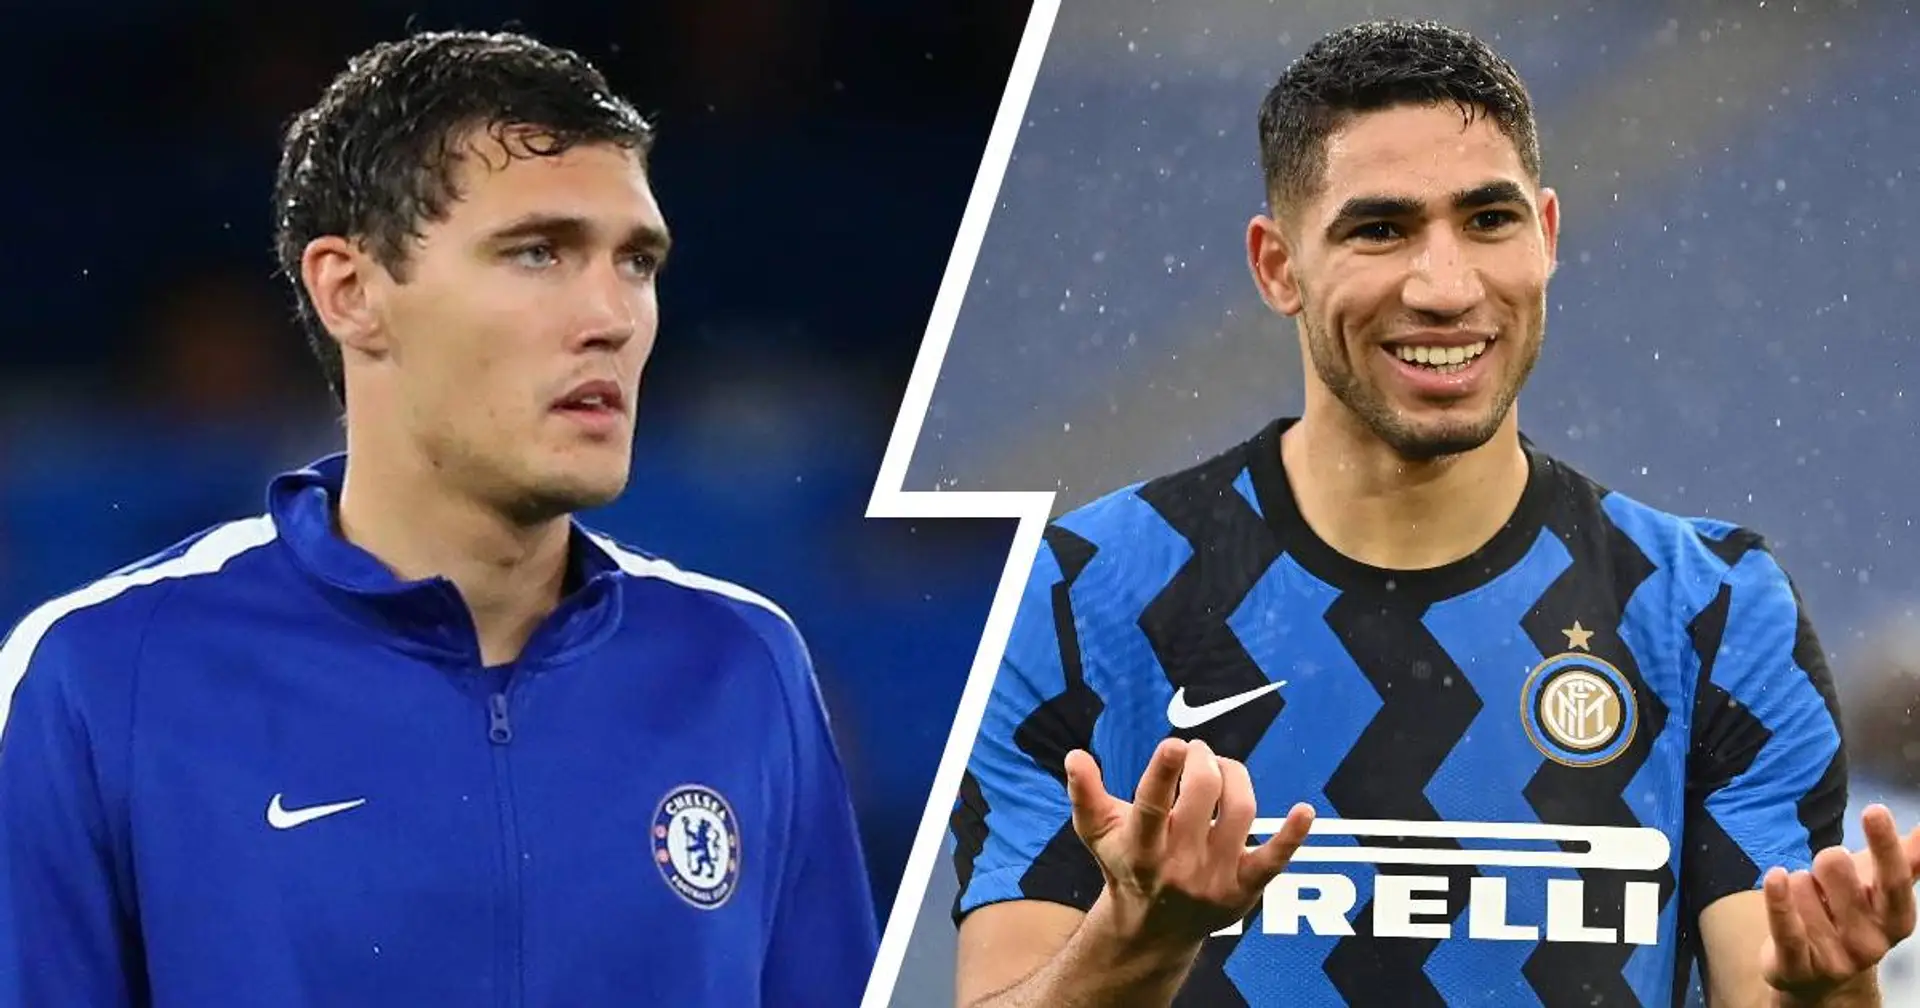 Chelsea bid for Inter right-back Hakimi, Christensen could be included in deal (reliability: 4 stars)